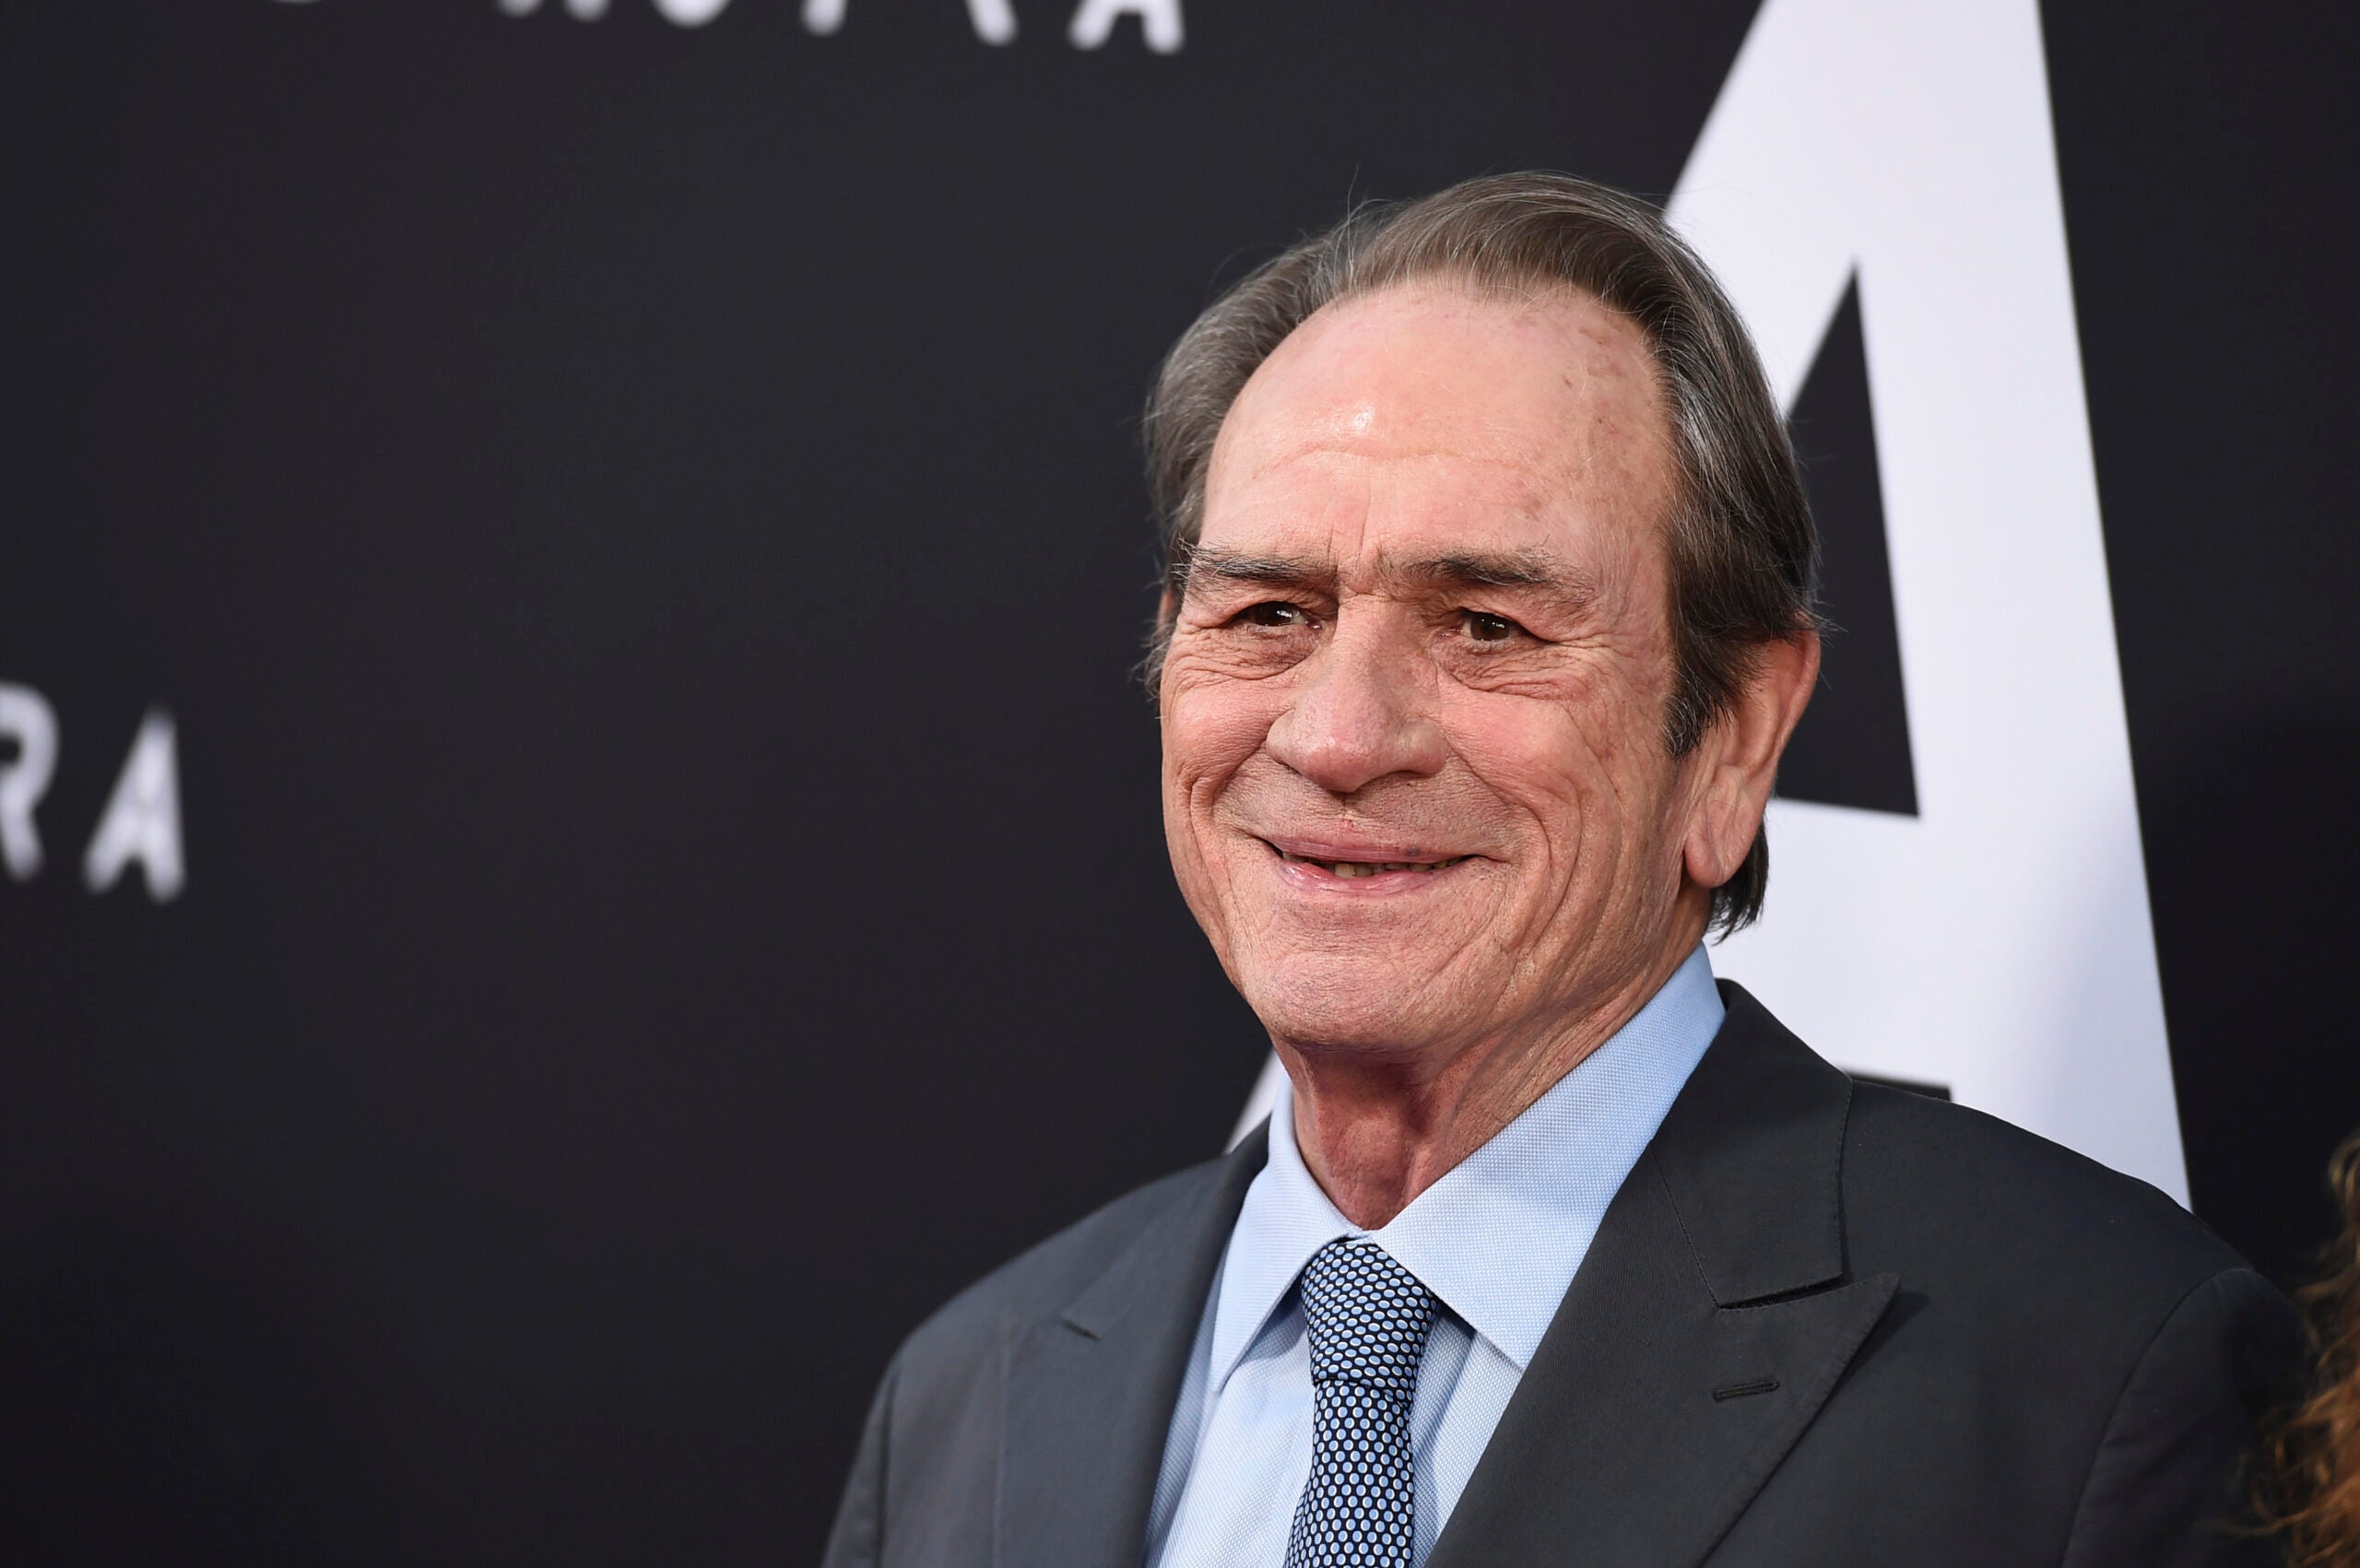 Tommy Lee Jones appears to have a favorite New Bedford restaurant